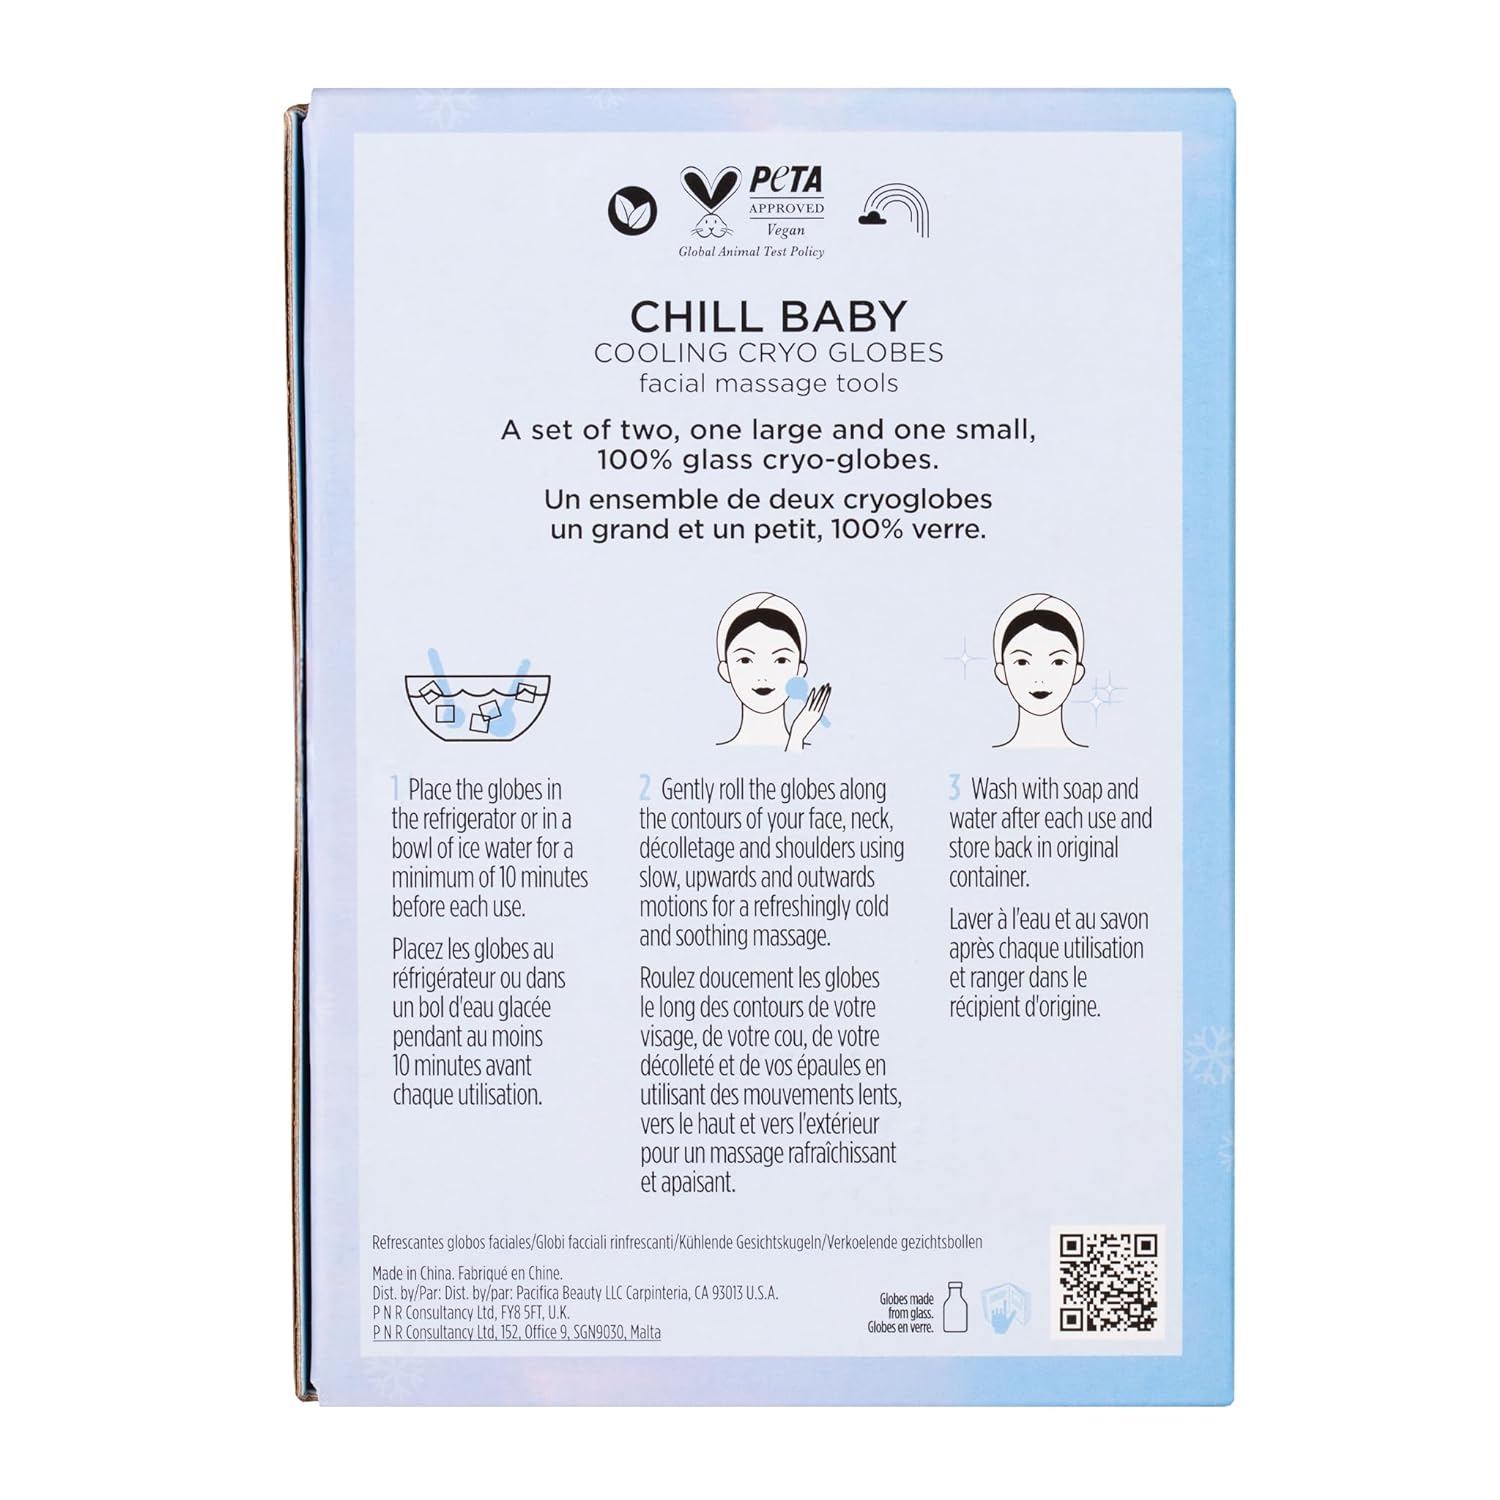 Pacifica Beauty, Chill Baby Cooling Glass Cryo Globes, For Cold Facial Massage, Face Massage, Small & Large Globes, Anti-Freeze Cooling Liquid, Minimize Pore Appearance, Reduce Redness & Puffiness : Beauty & Personal Care